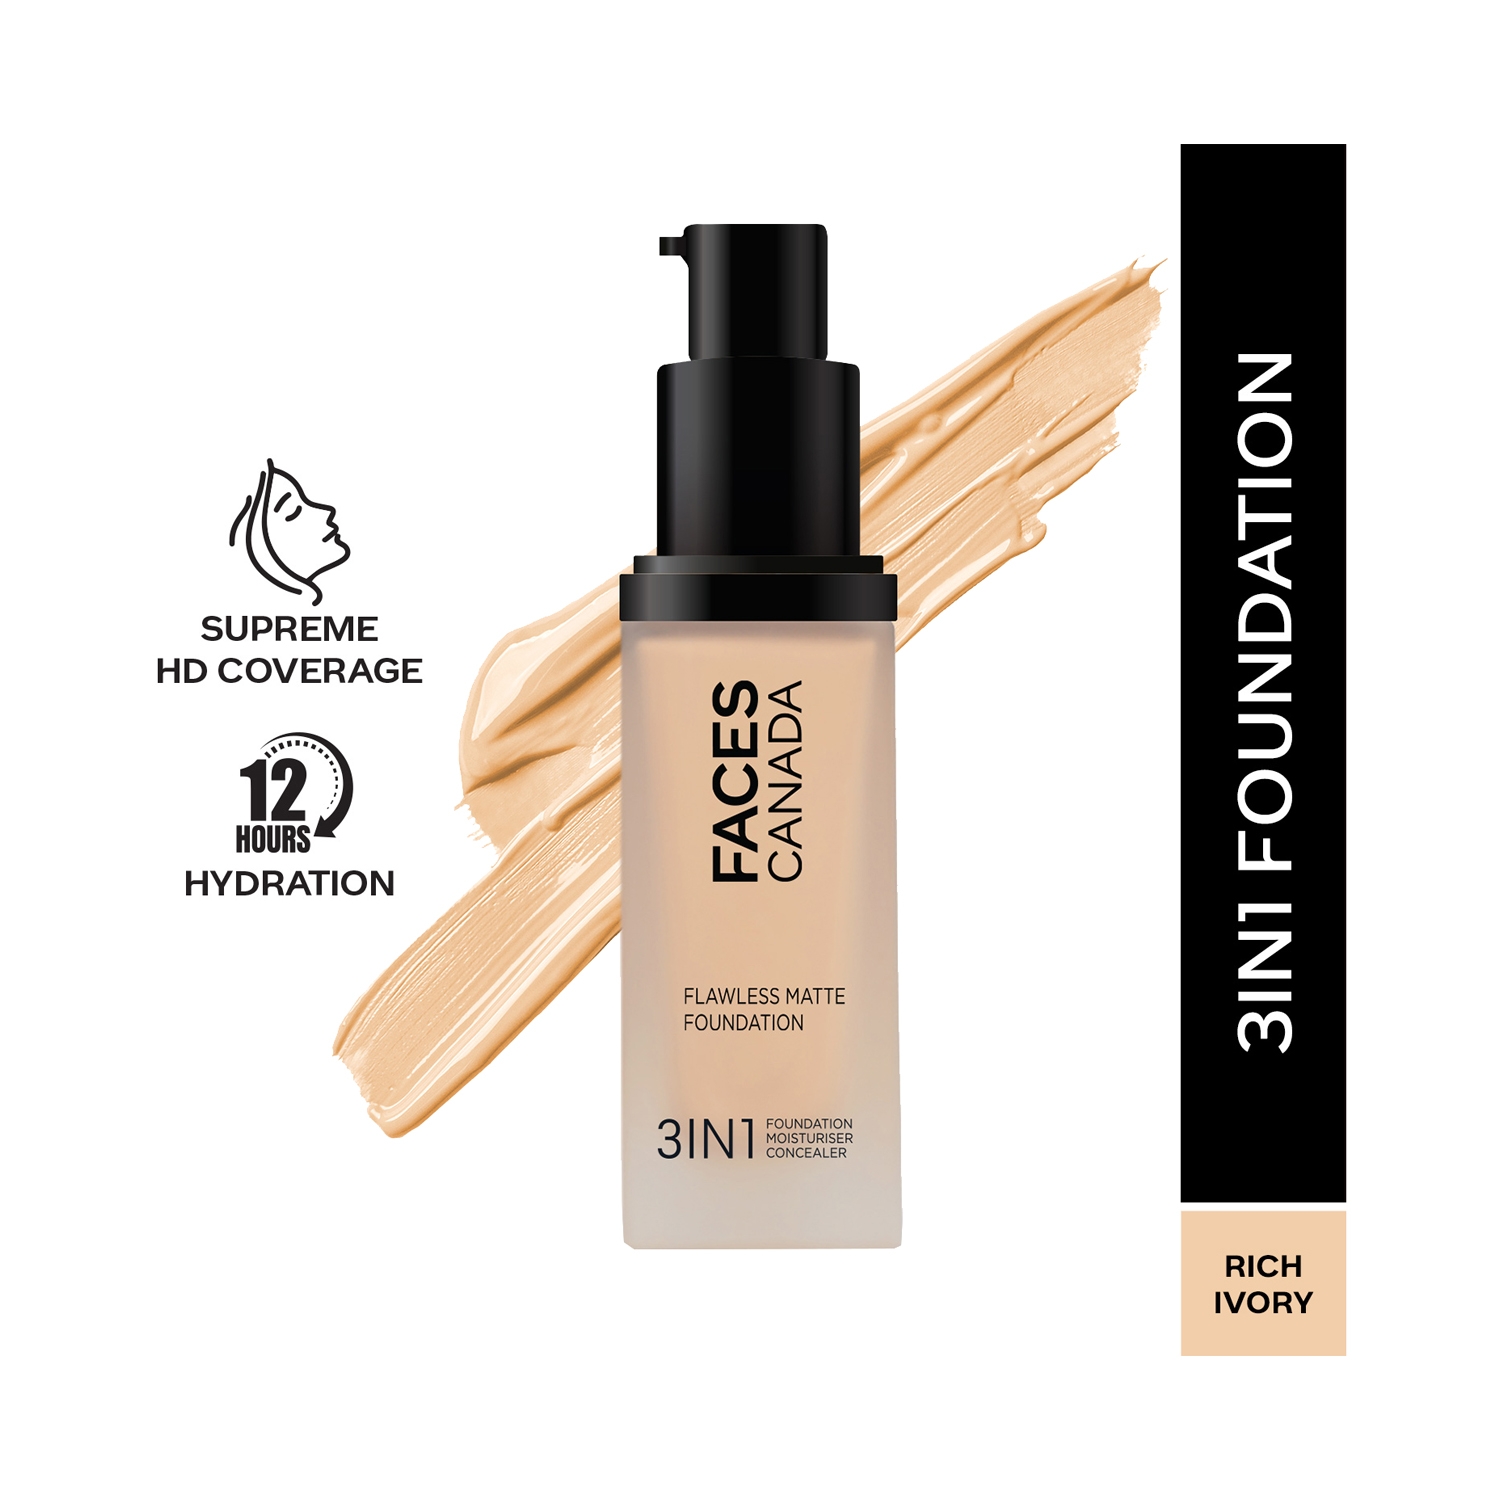 Faces Canada | Faces Canada 3-In-1 Flawless Matte Foundation SPF 18 - 013 Rich Ivory (30ml)